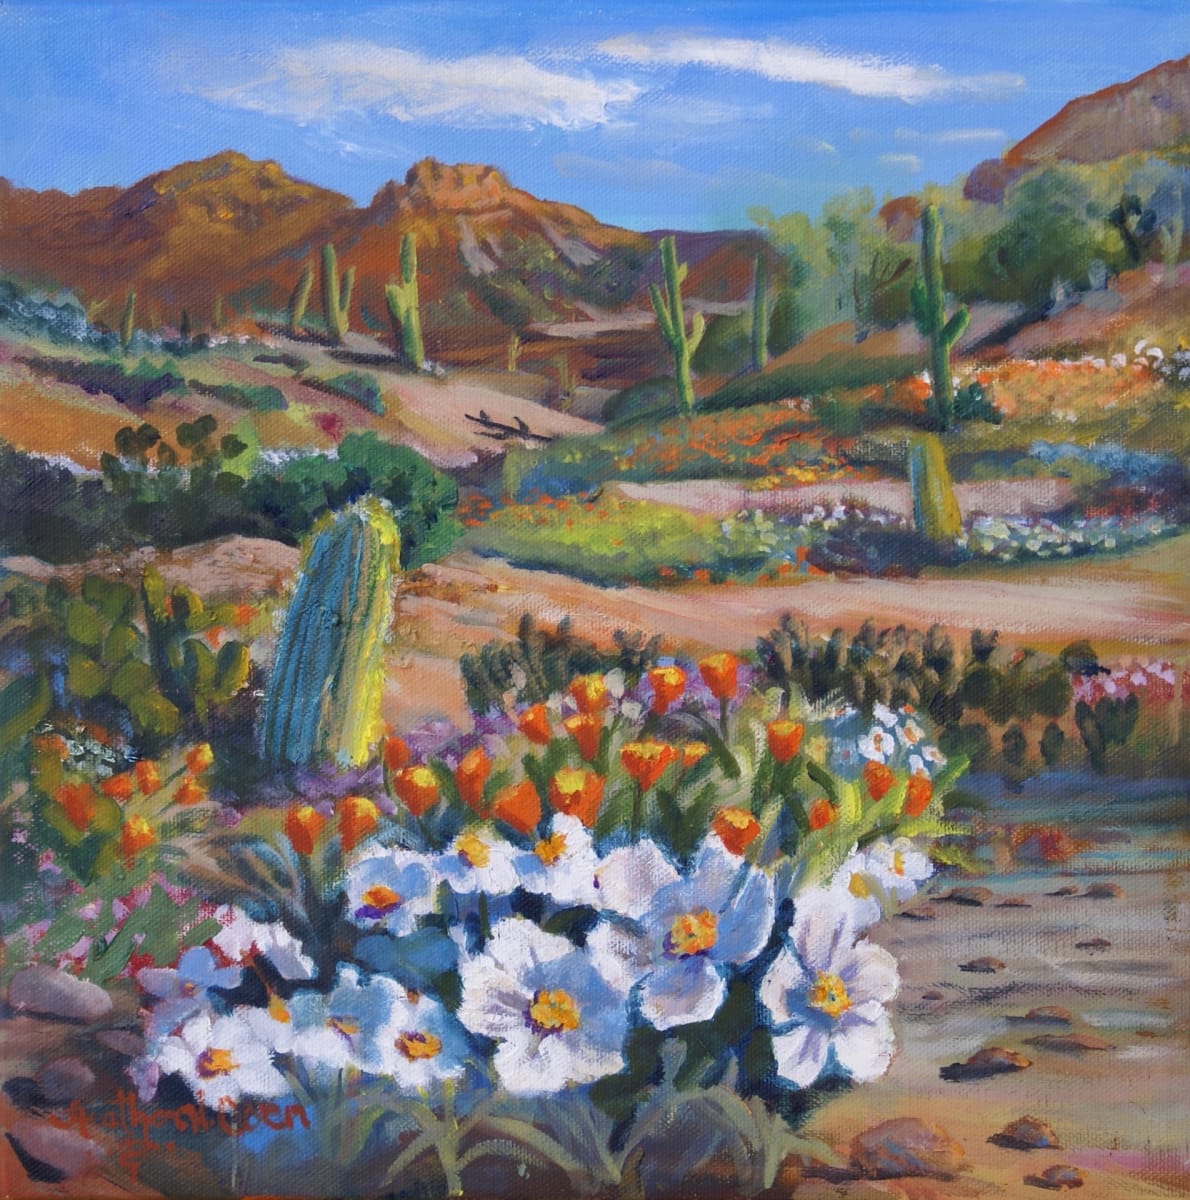 Oasis by Heather Coen  Image: Flowers bloom after a wet spring in the deserts.